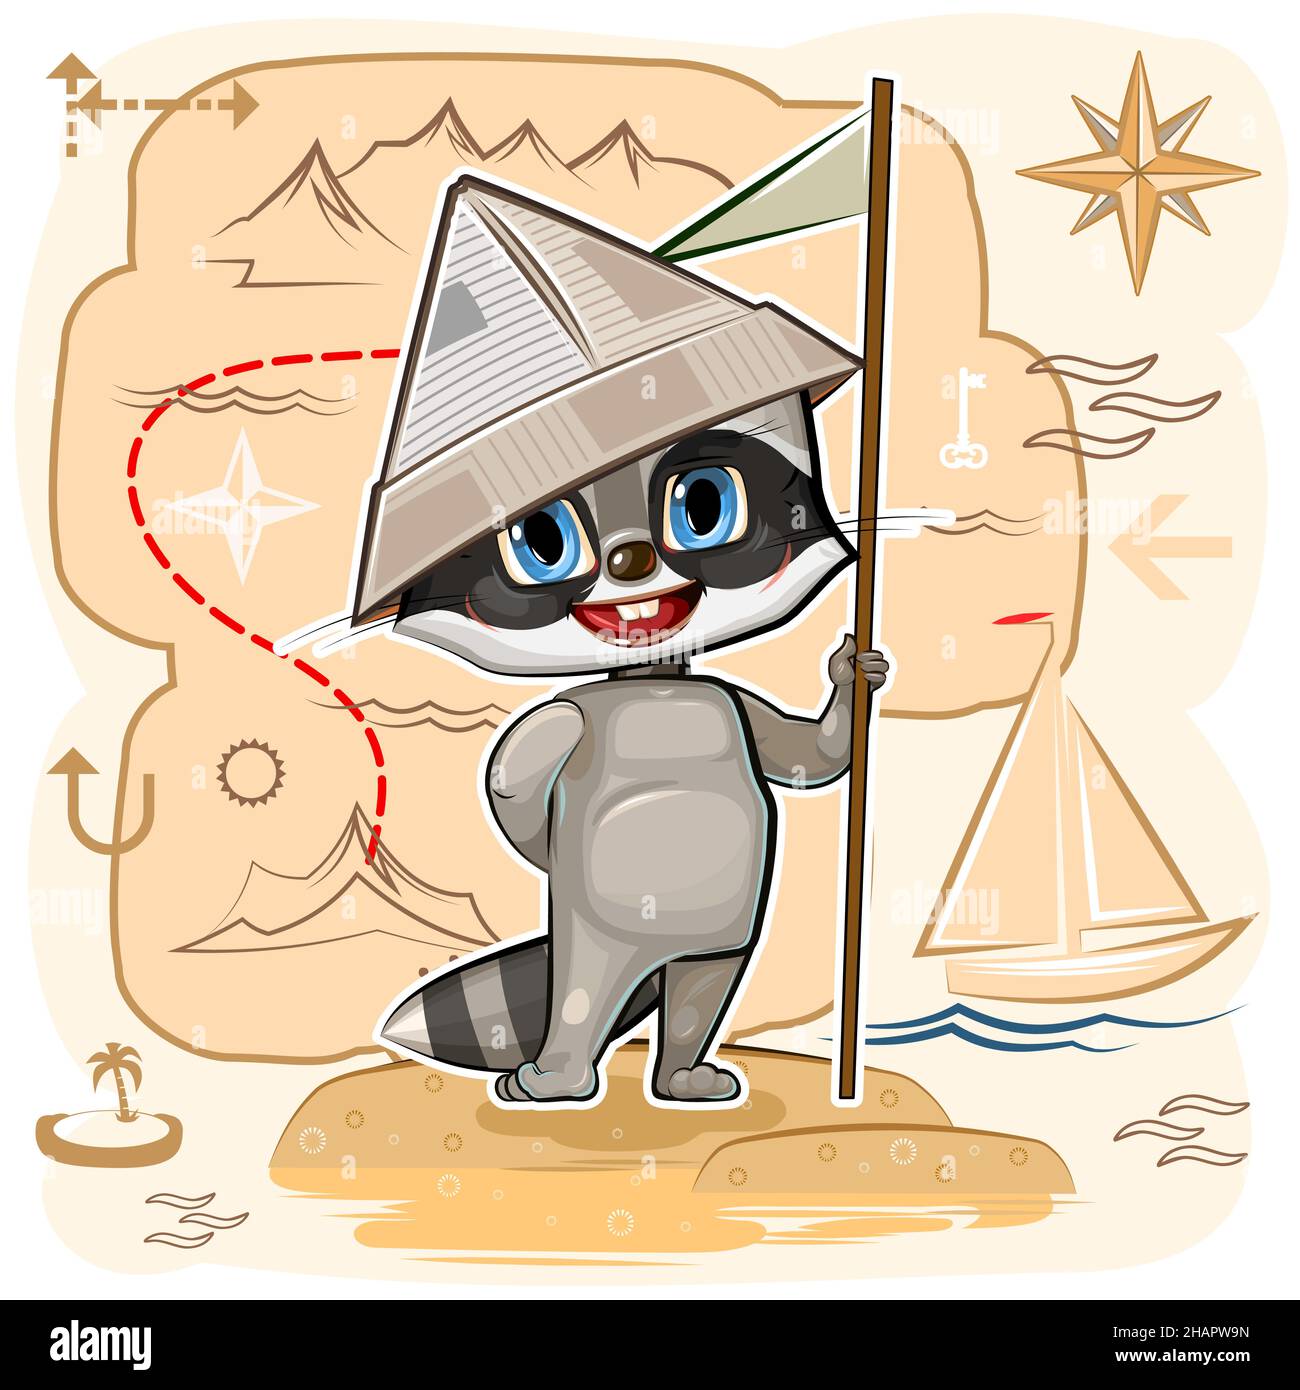 Raccoon is traveler. Child Game. Map with route. Look for pirate treasures on island and have fun in sea adventures. Cute baby animal. Cartoon style. Stock Vector